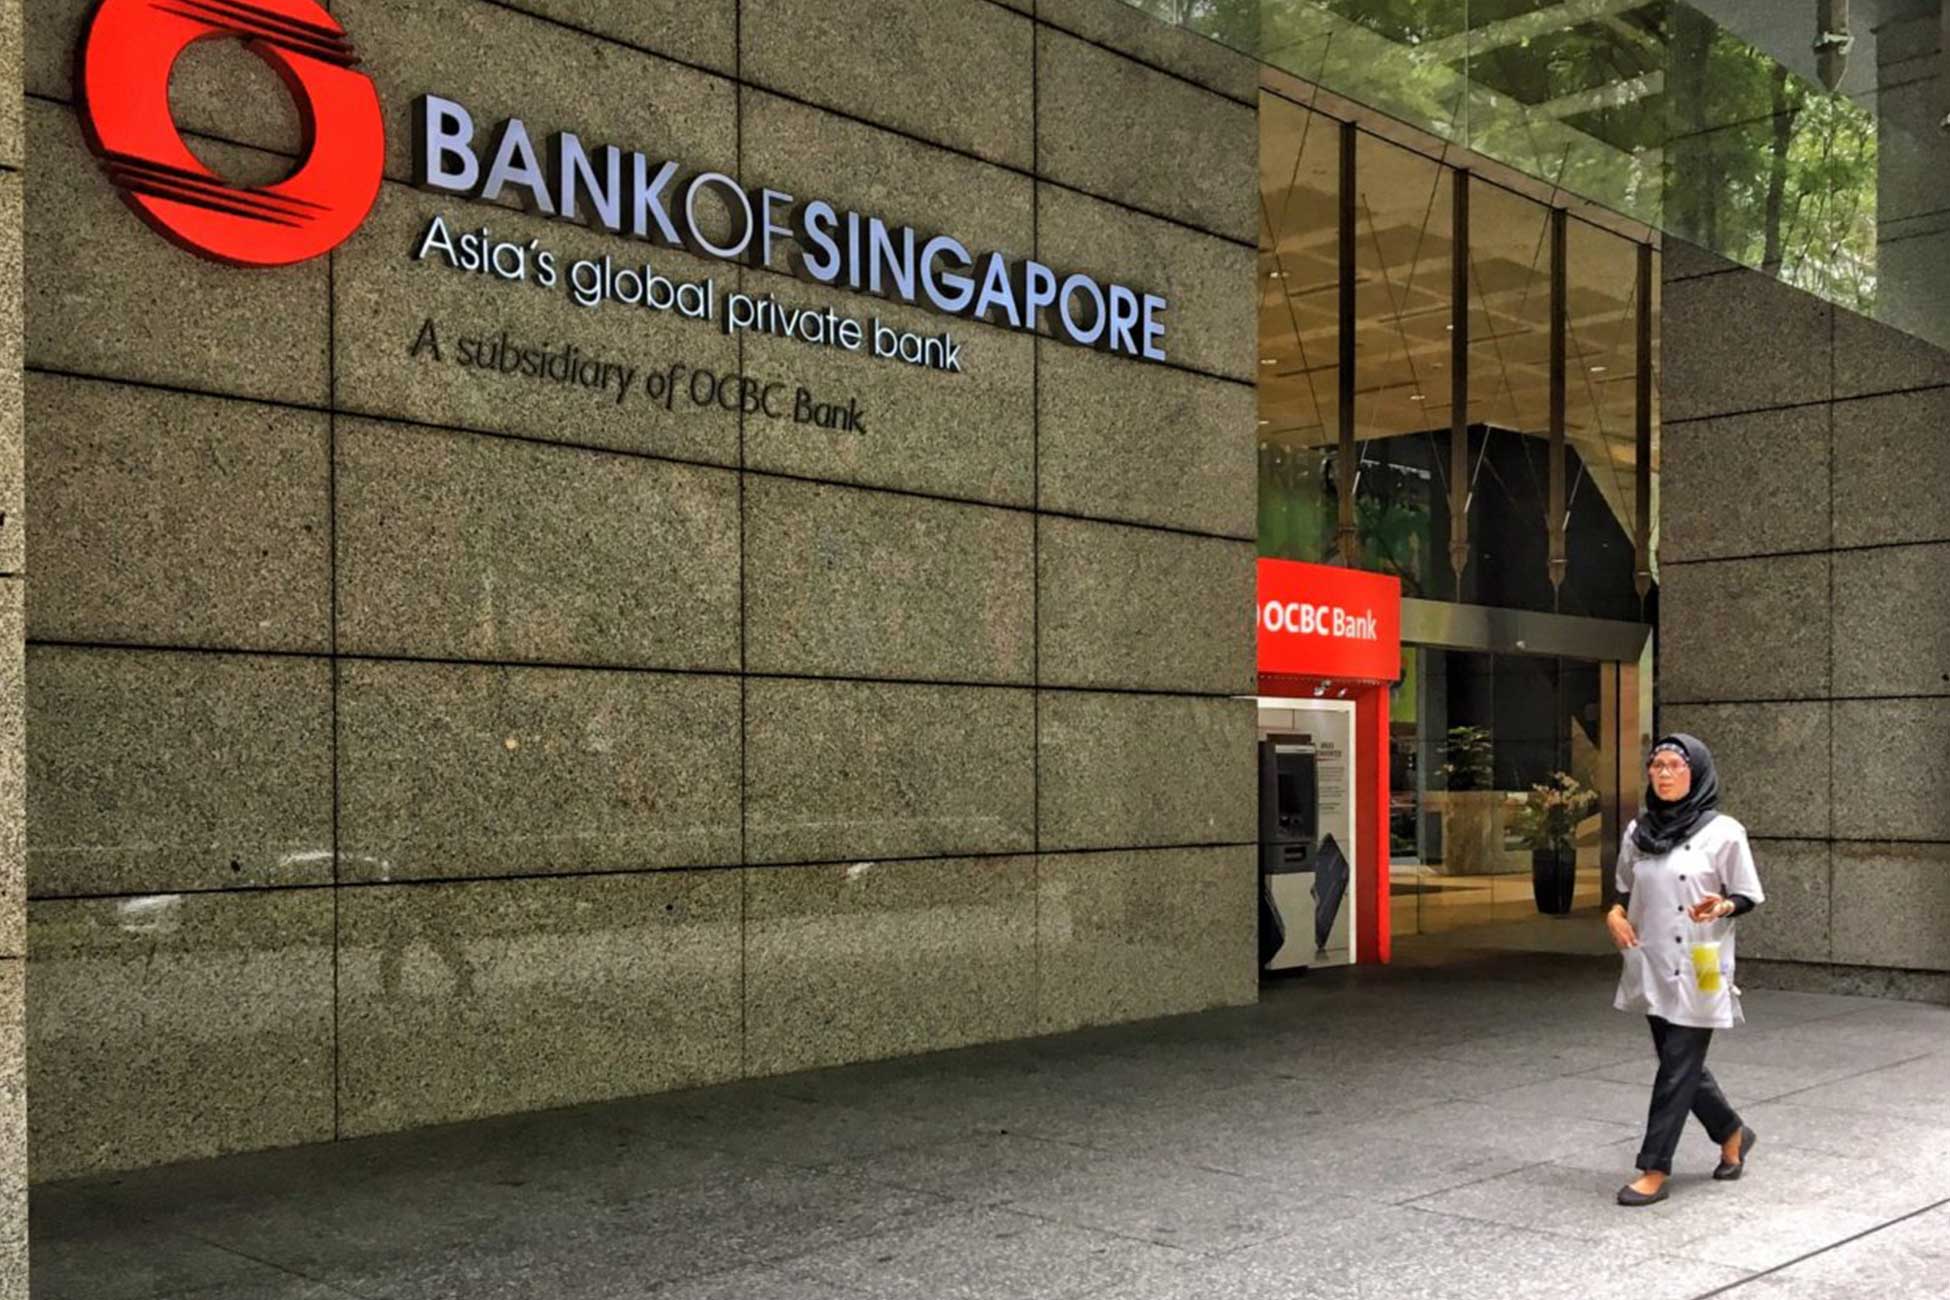 Open a bank account in Singapore